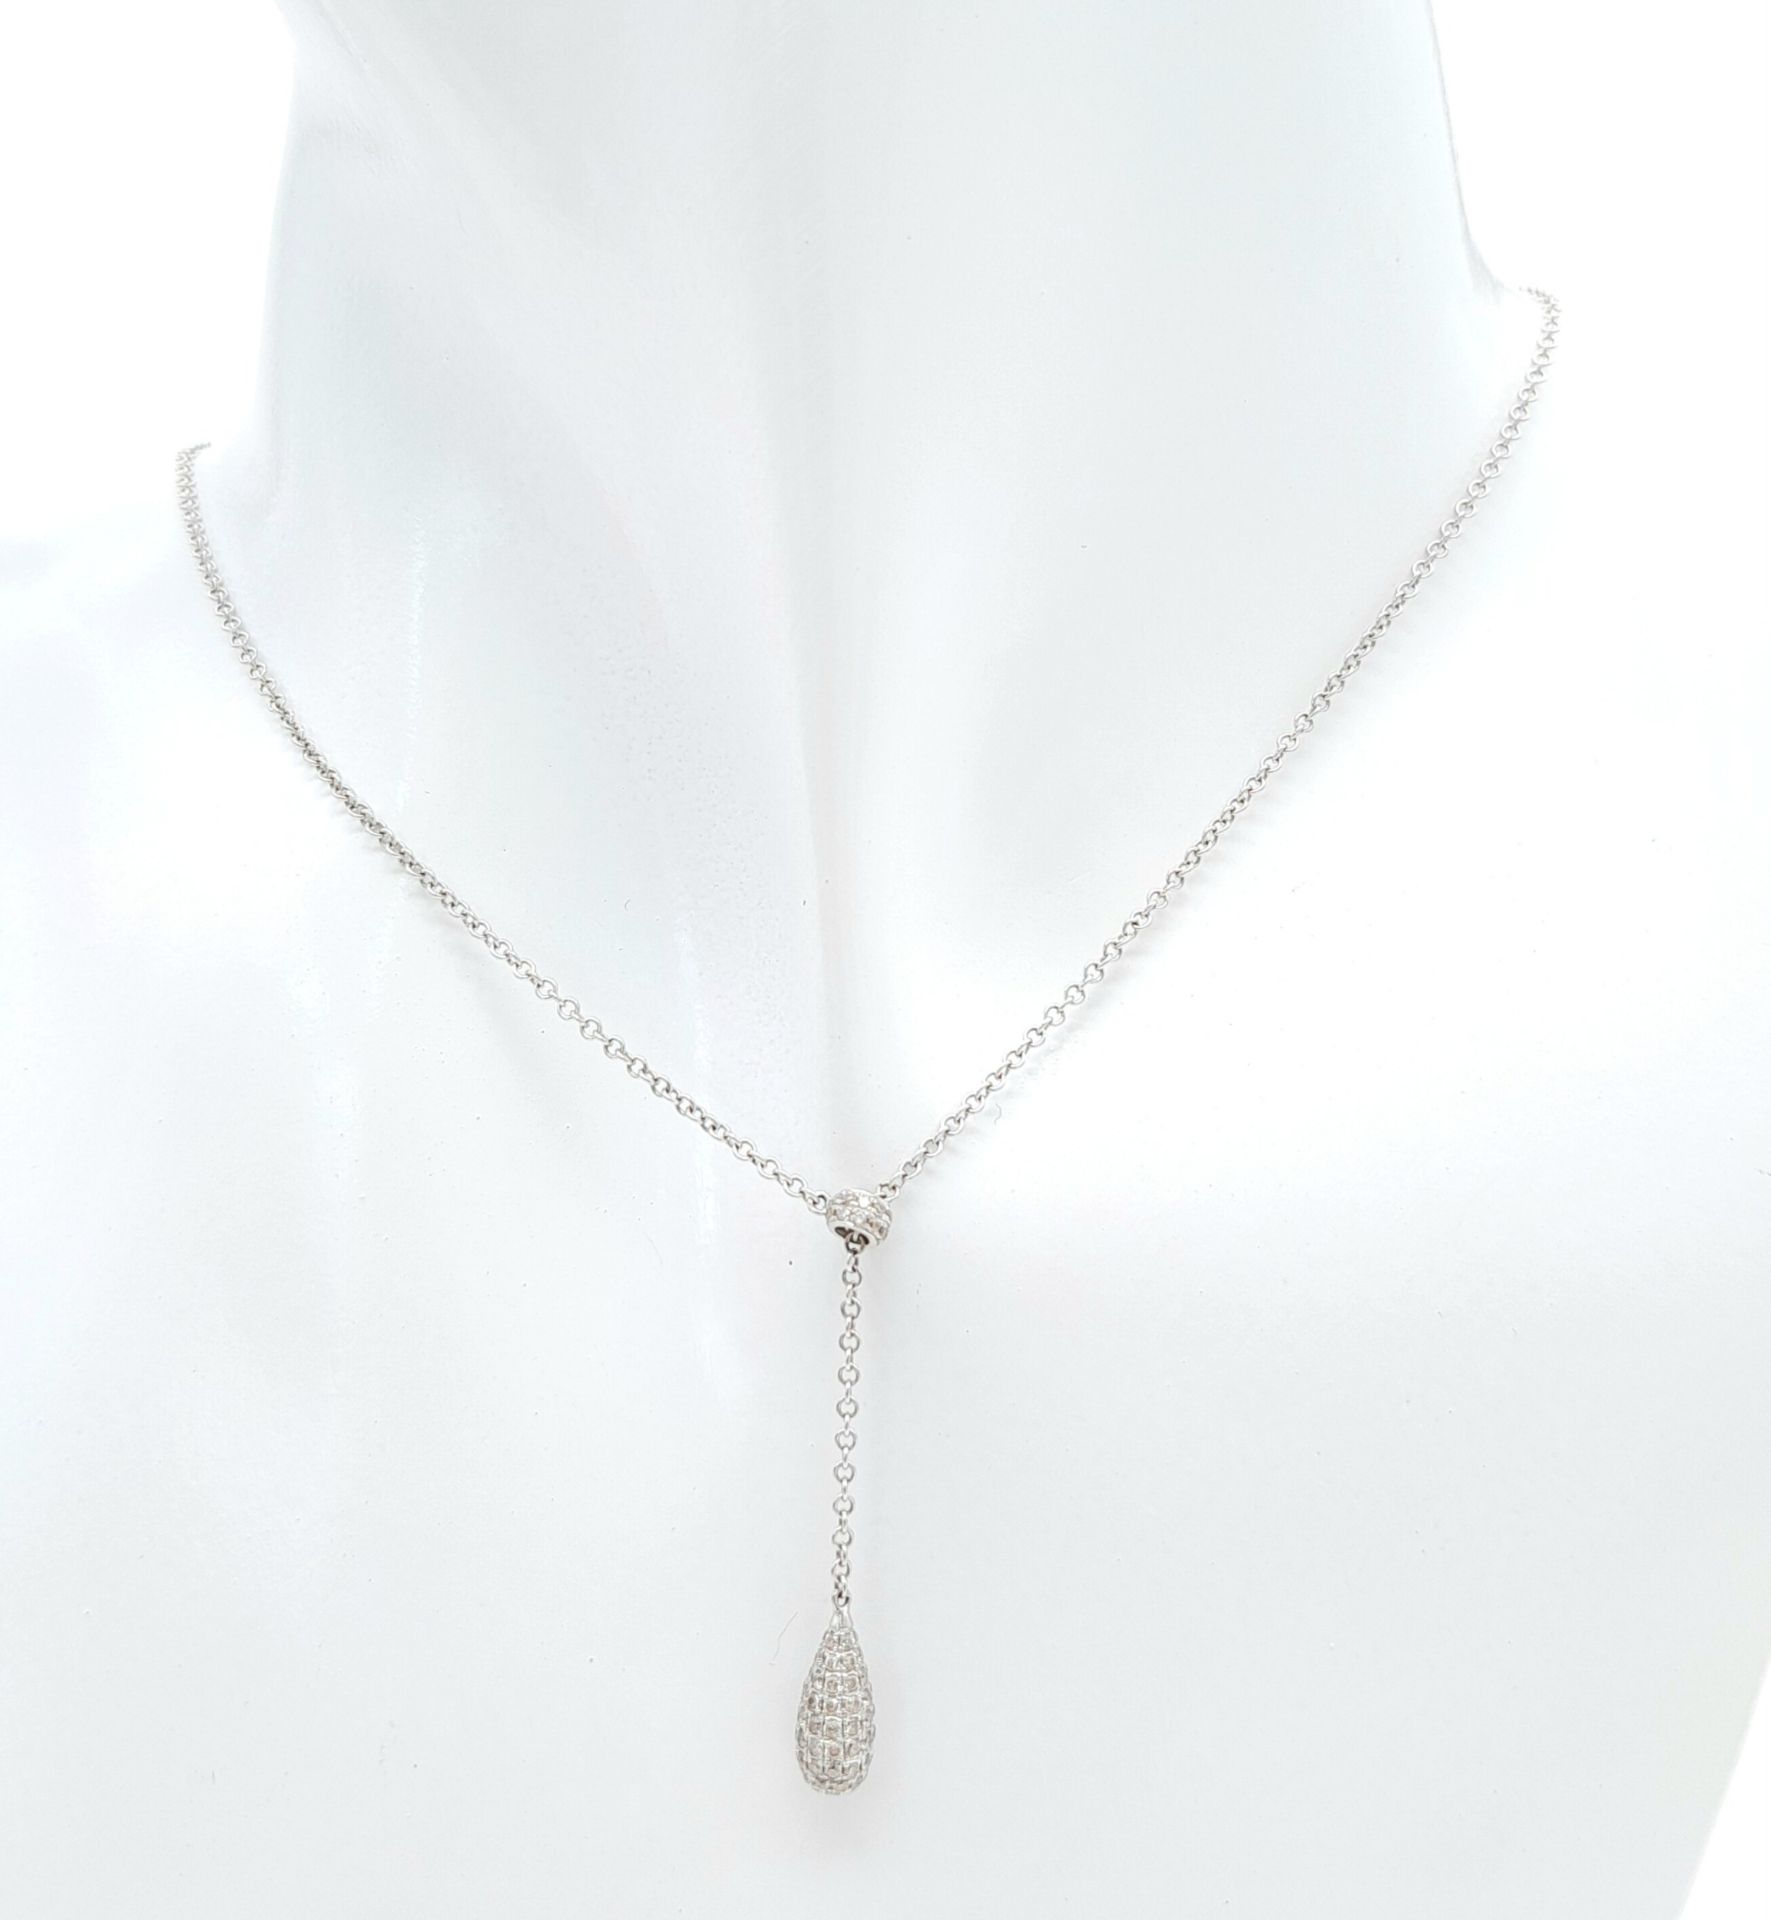 A 18ct White Gold Diamond Pave Drop Necklace, 18” length, 3.1g weight, approx 31mm drop. ref: